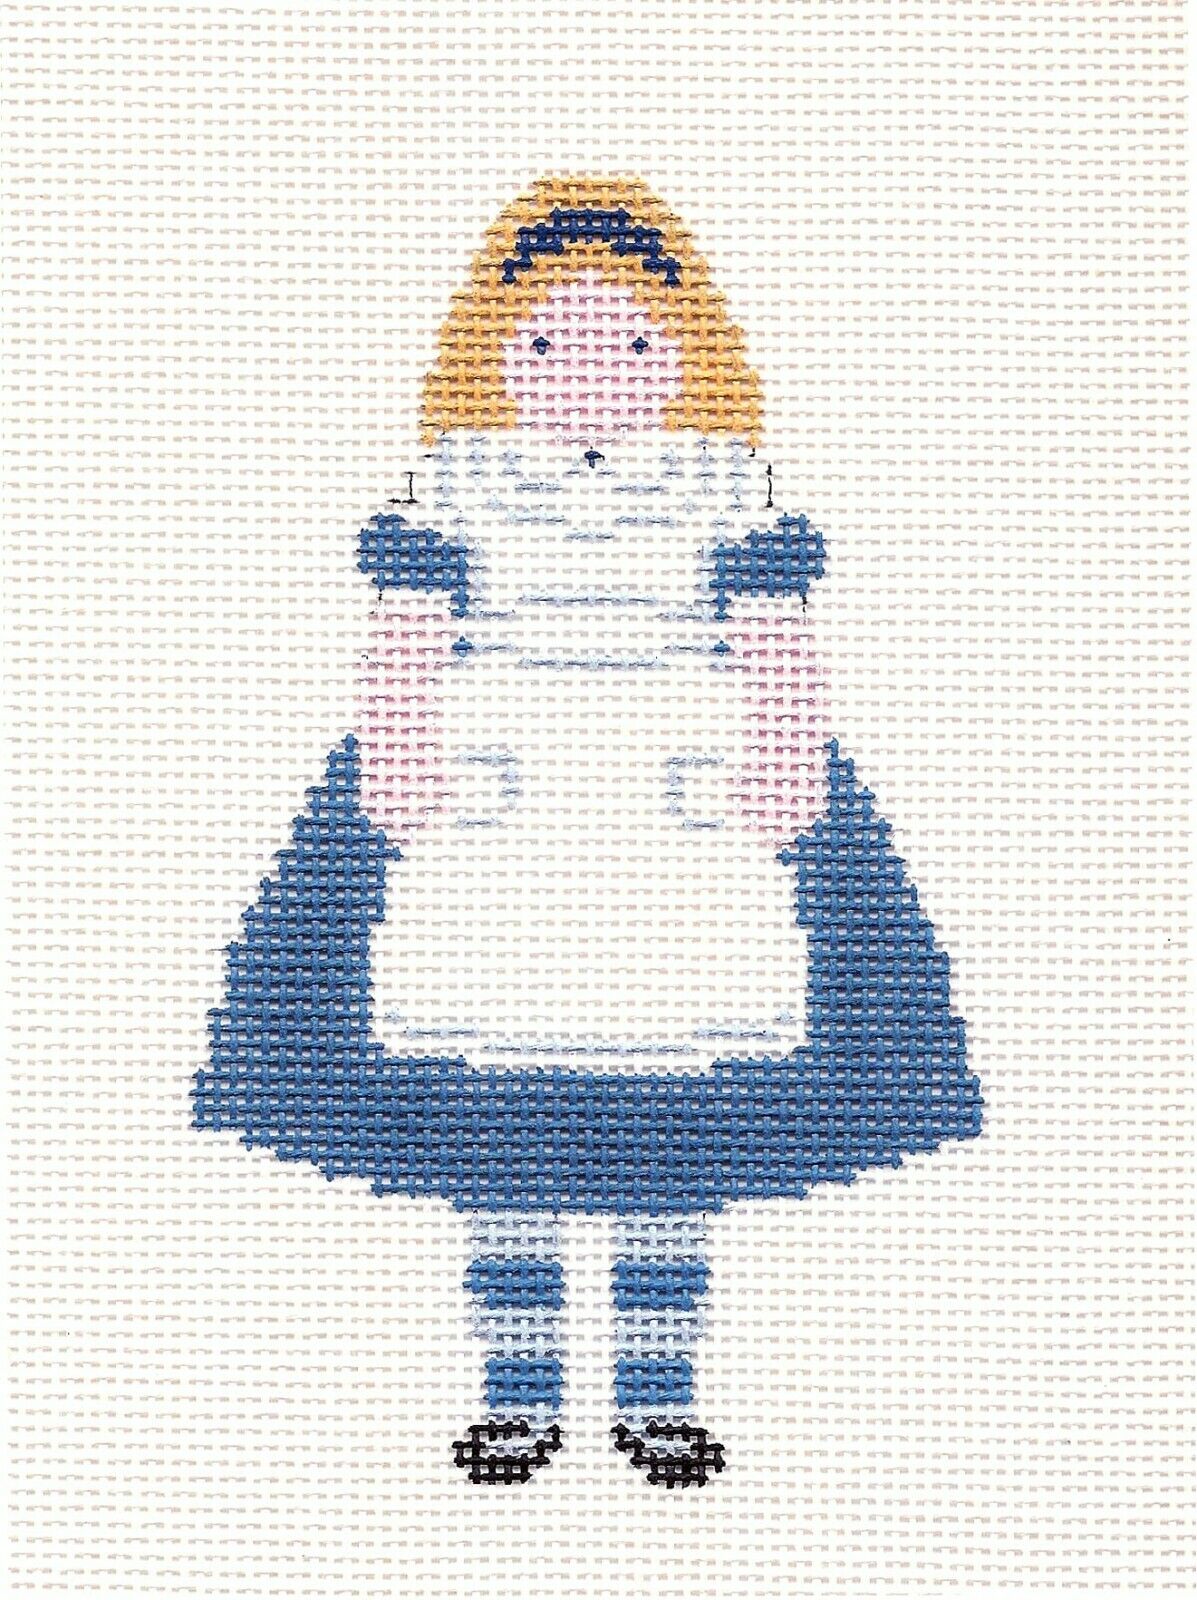 Sp.order ~ "alice" Alice In Wonderland" Hp Needlepoint Canvas By Petei ~ Pony